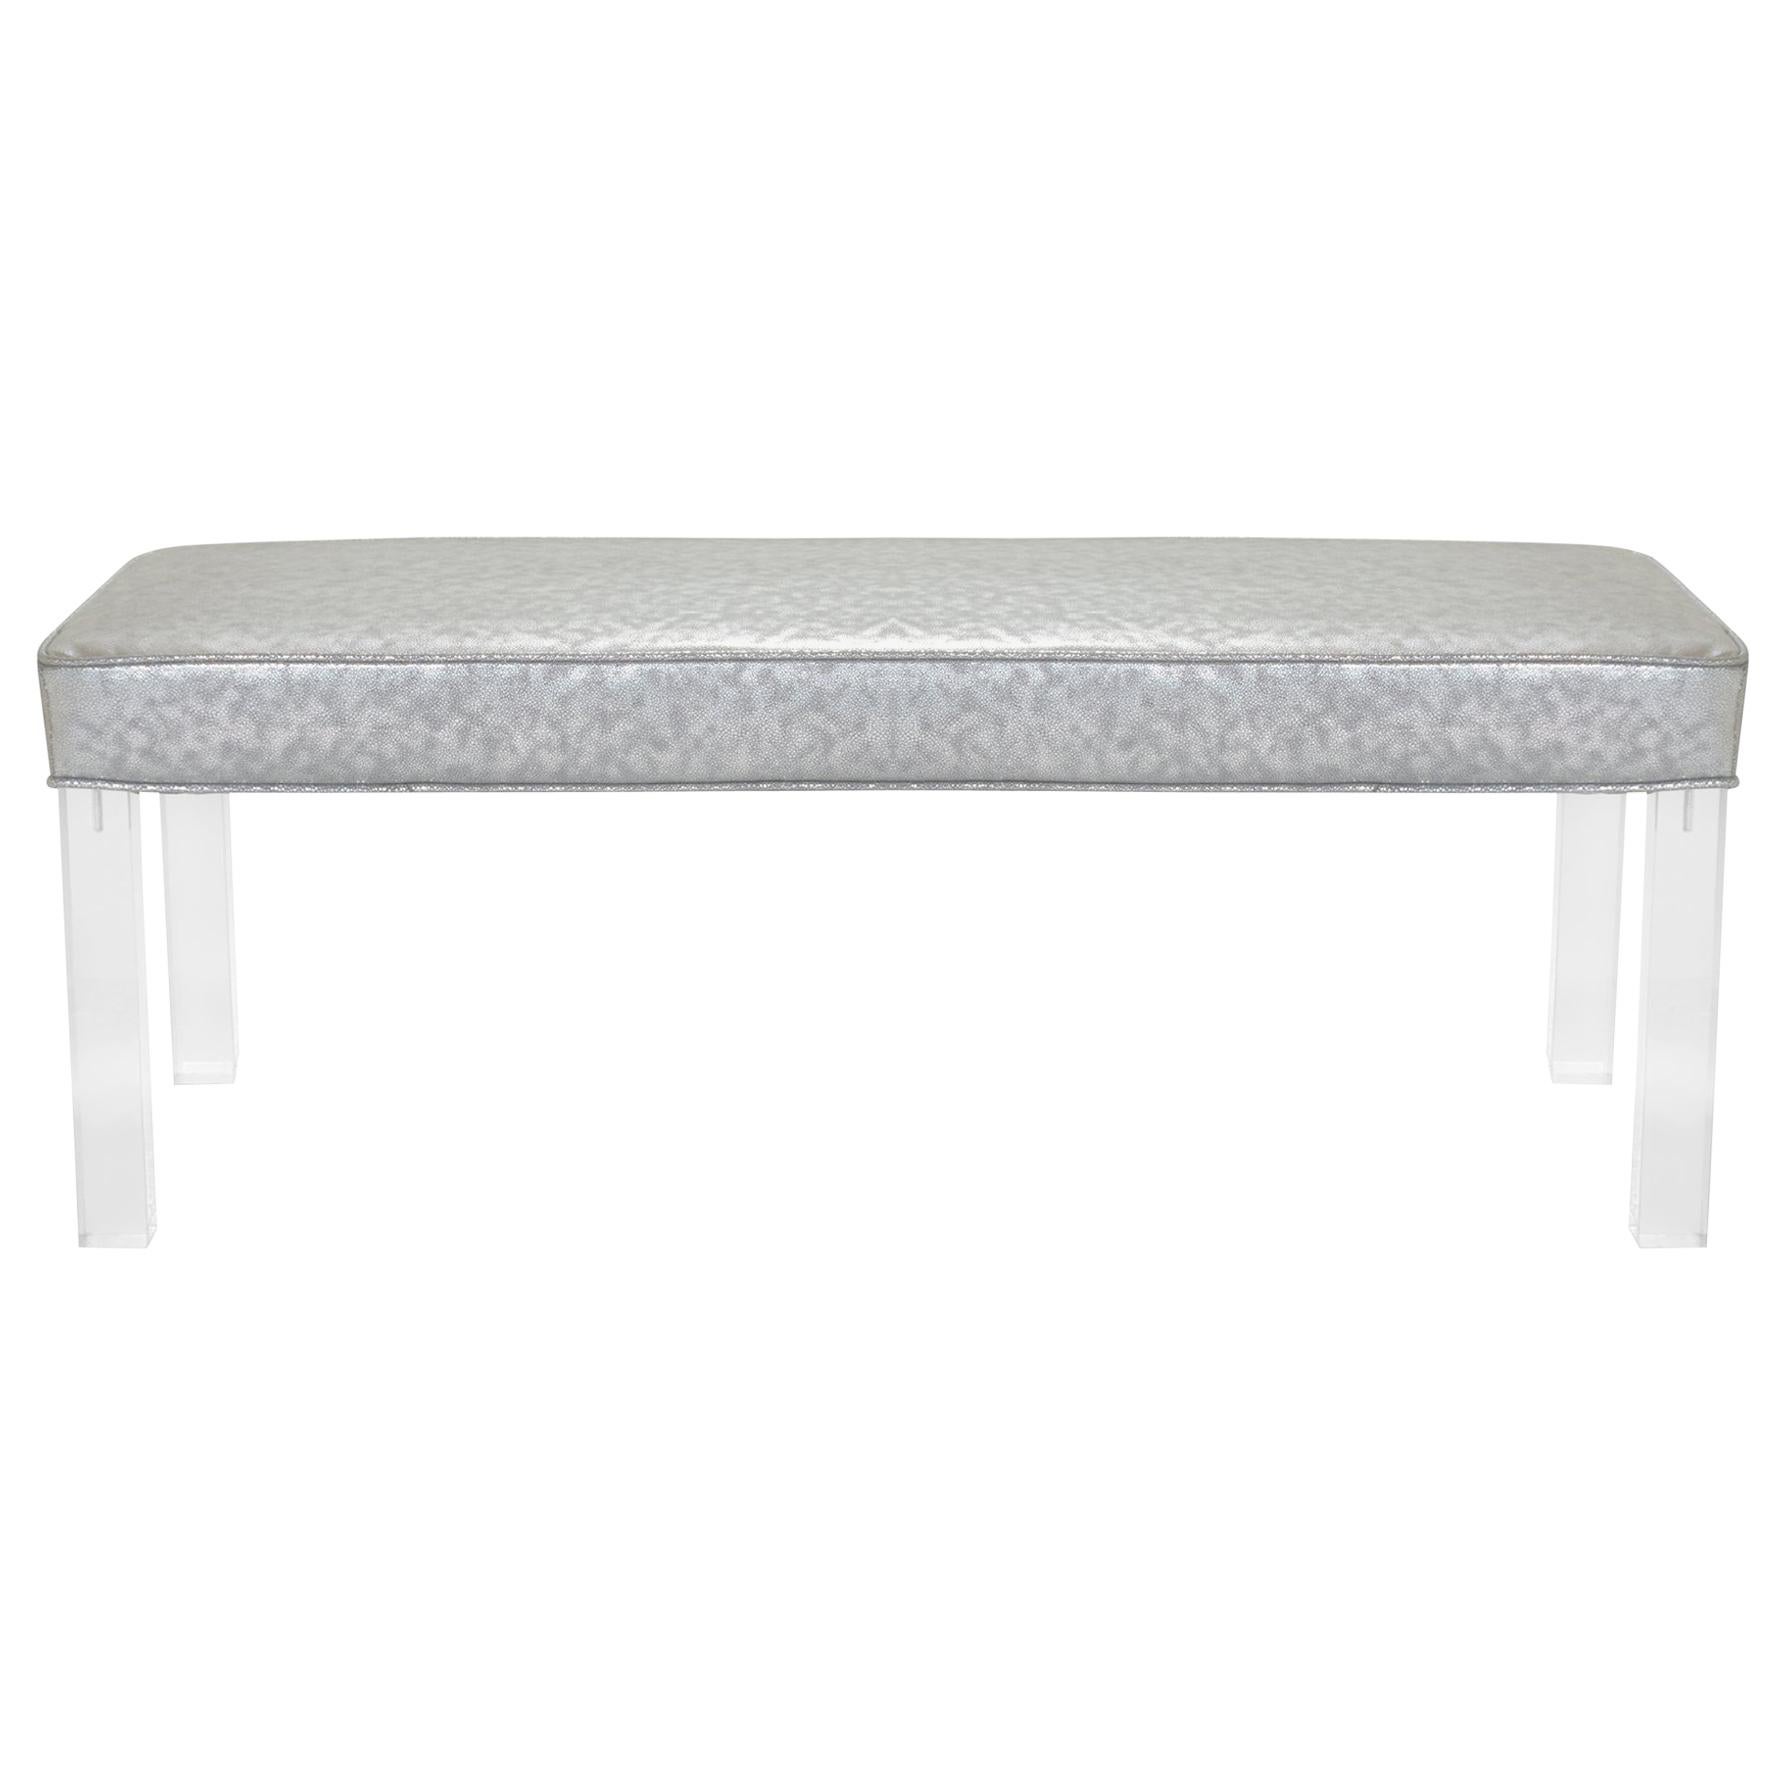 Prism Bench in Sharkskin Motif Leather by Montage